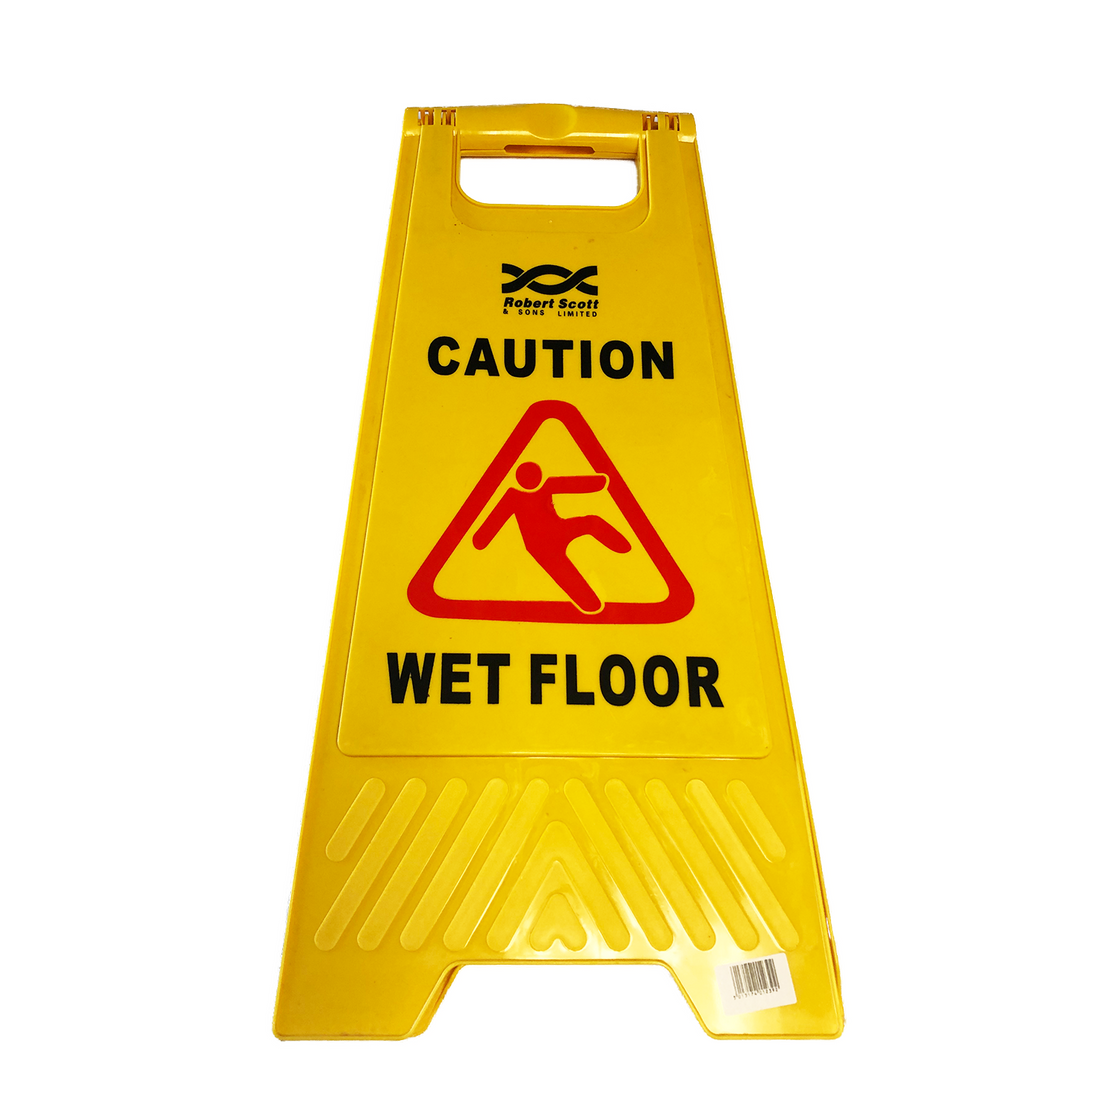 FOLDABLE CATION WET FLOOR SIGN - 0.6M TALL YELLOW - PGS Supplies 21 Ltd